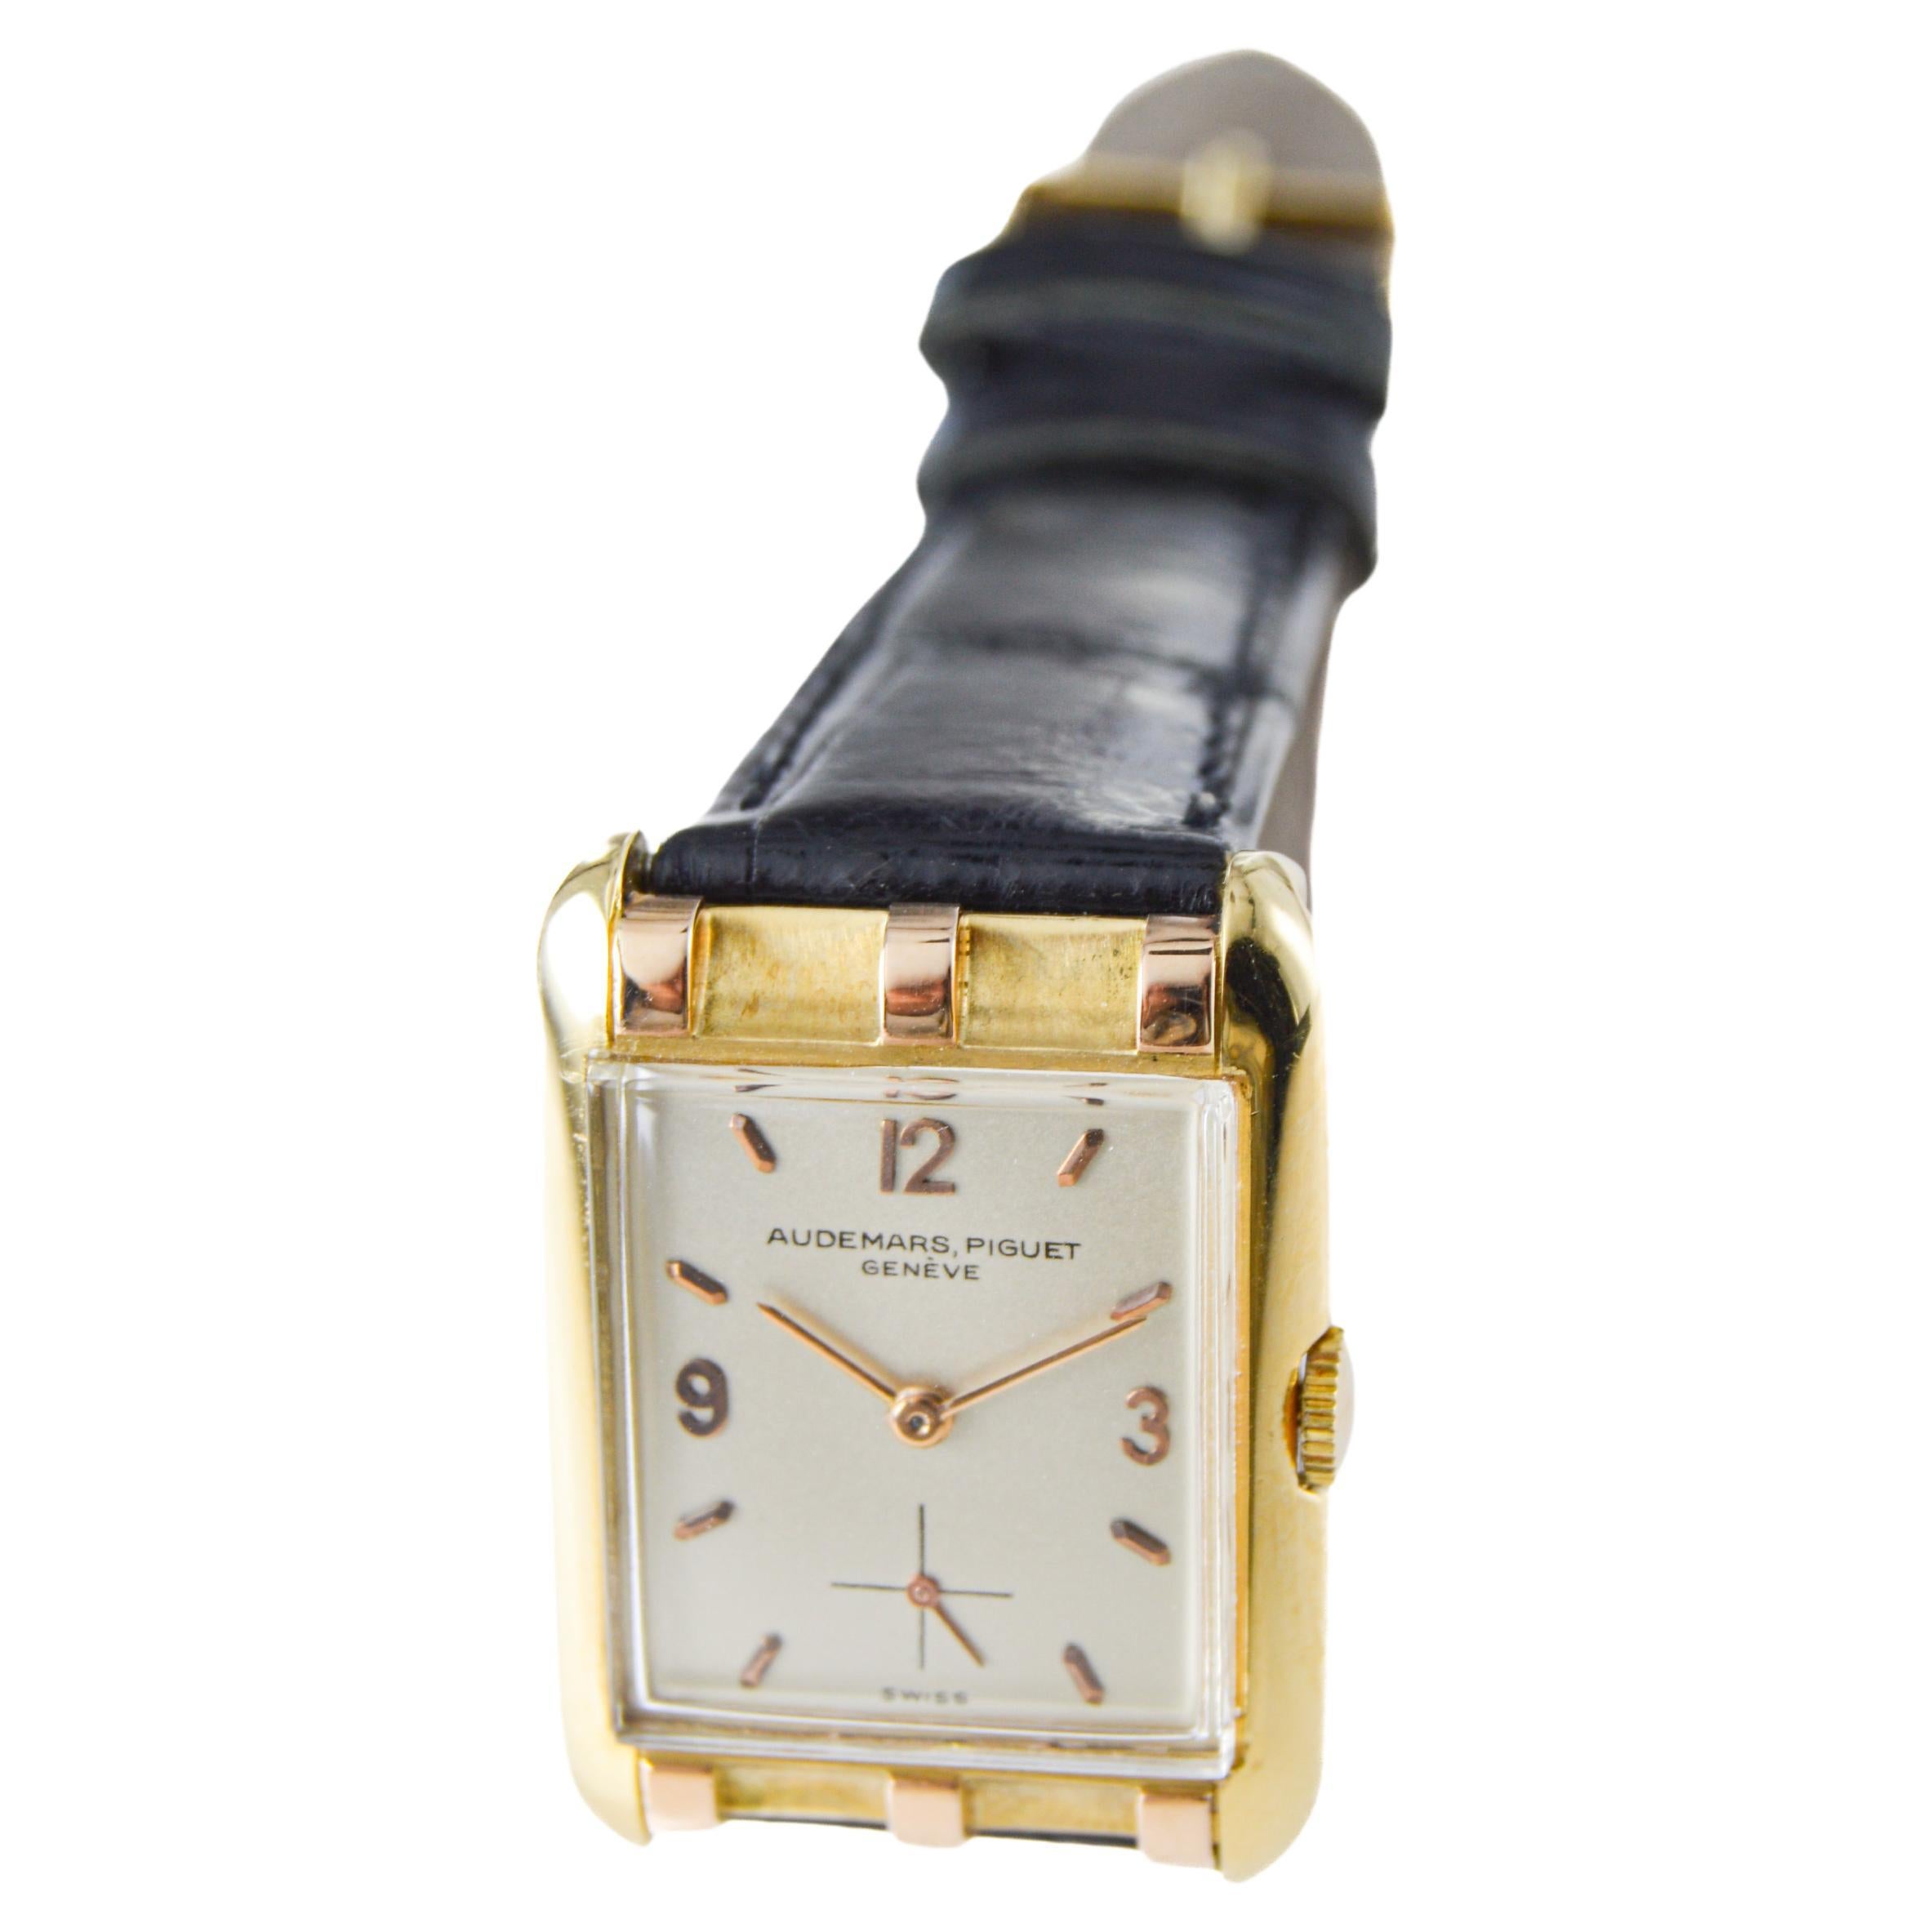 Audemars Piguet 18Kt. Yellow and Rose Gold Hand Made Art Deco Dress Watch 1940's In Excellent Condition For Sale In Long Beach, CA